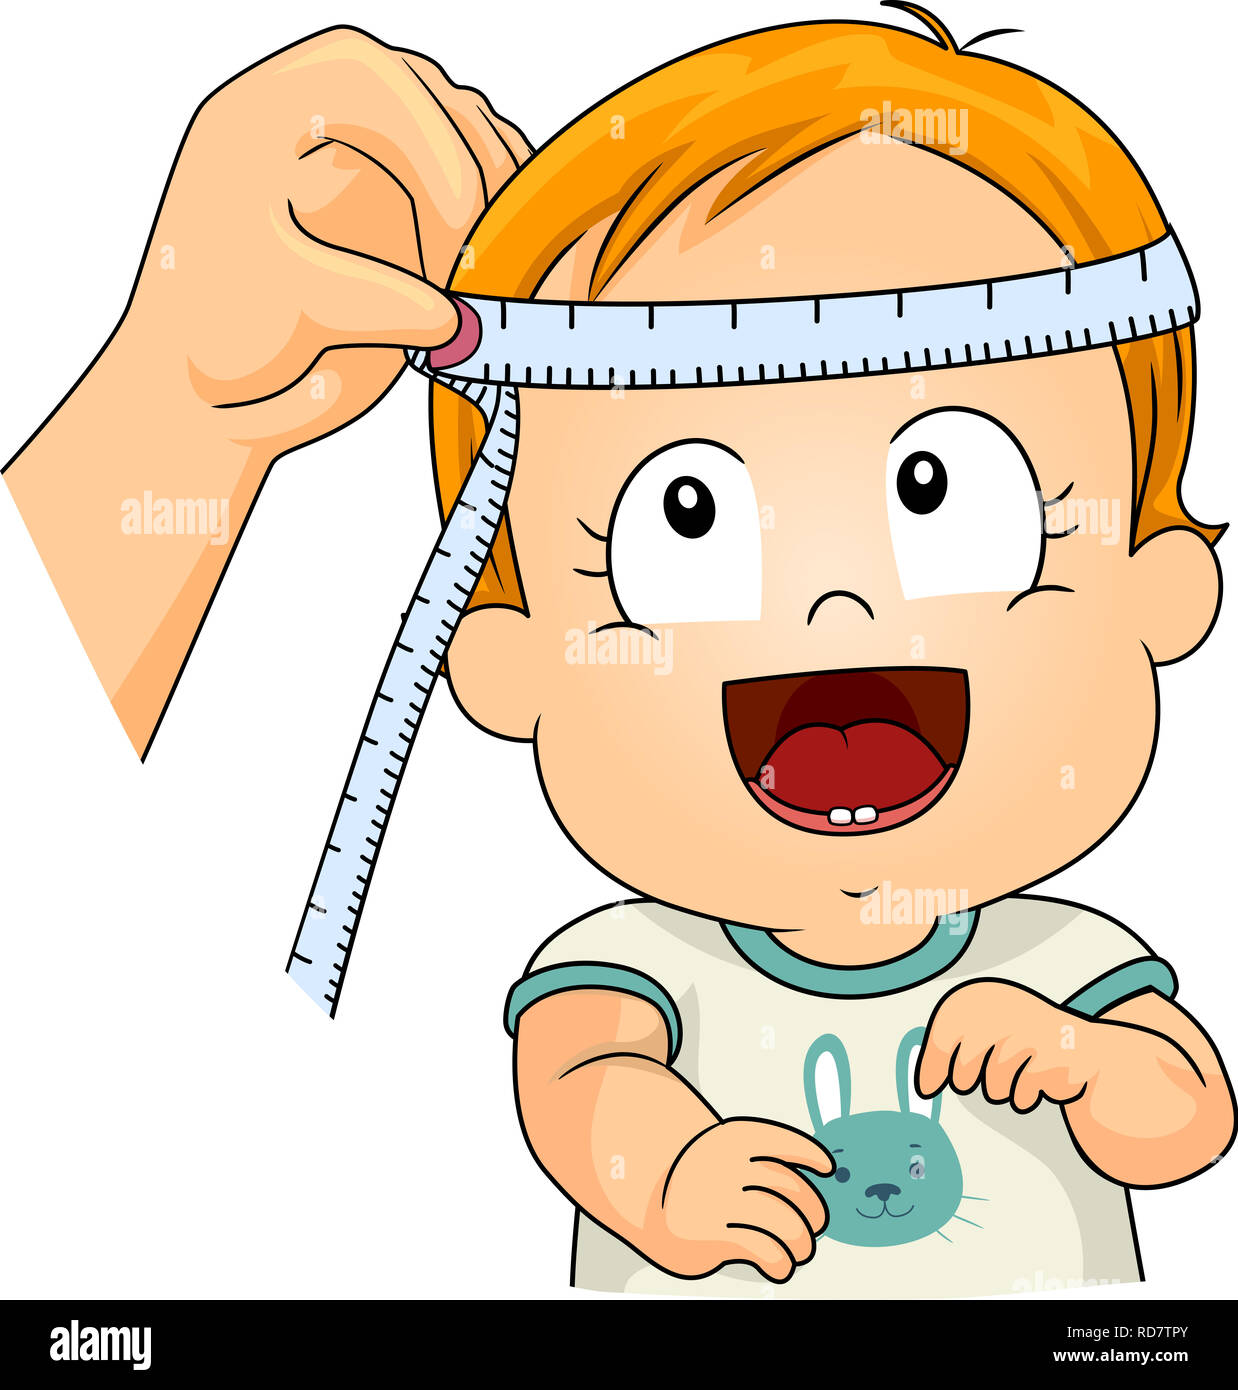 https://c8.alamy.com/comp/RD7TPY/illustration-of-a-kid-boy-toddler-with-tape-measure-being-measured-to-get-his-head-circumference-RD7TPY.jpg